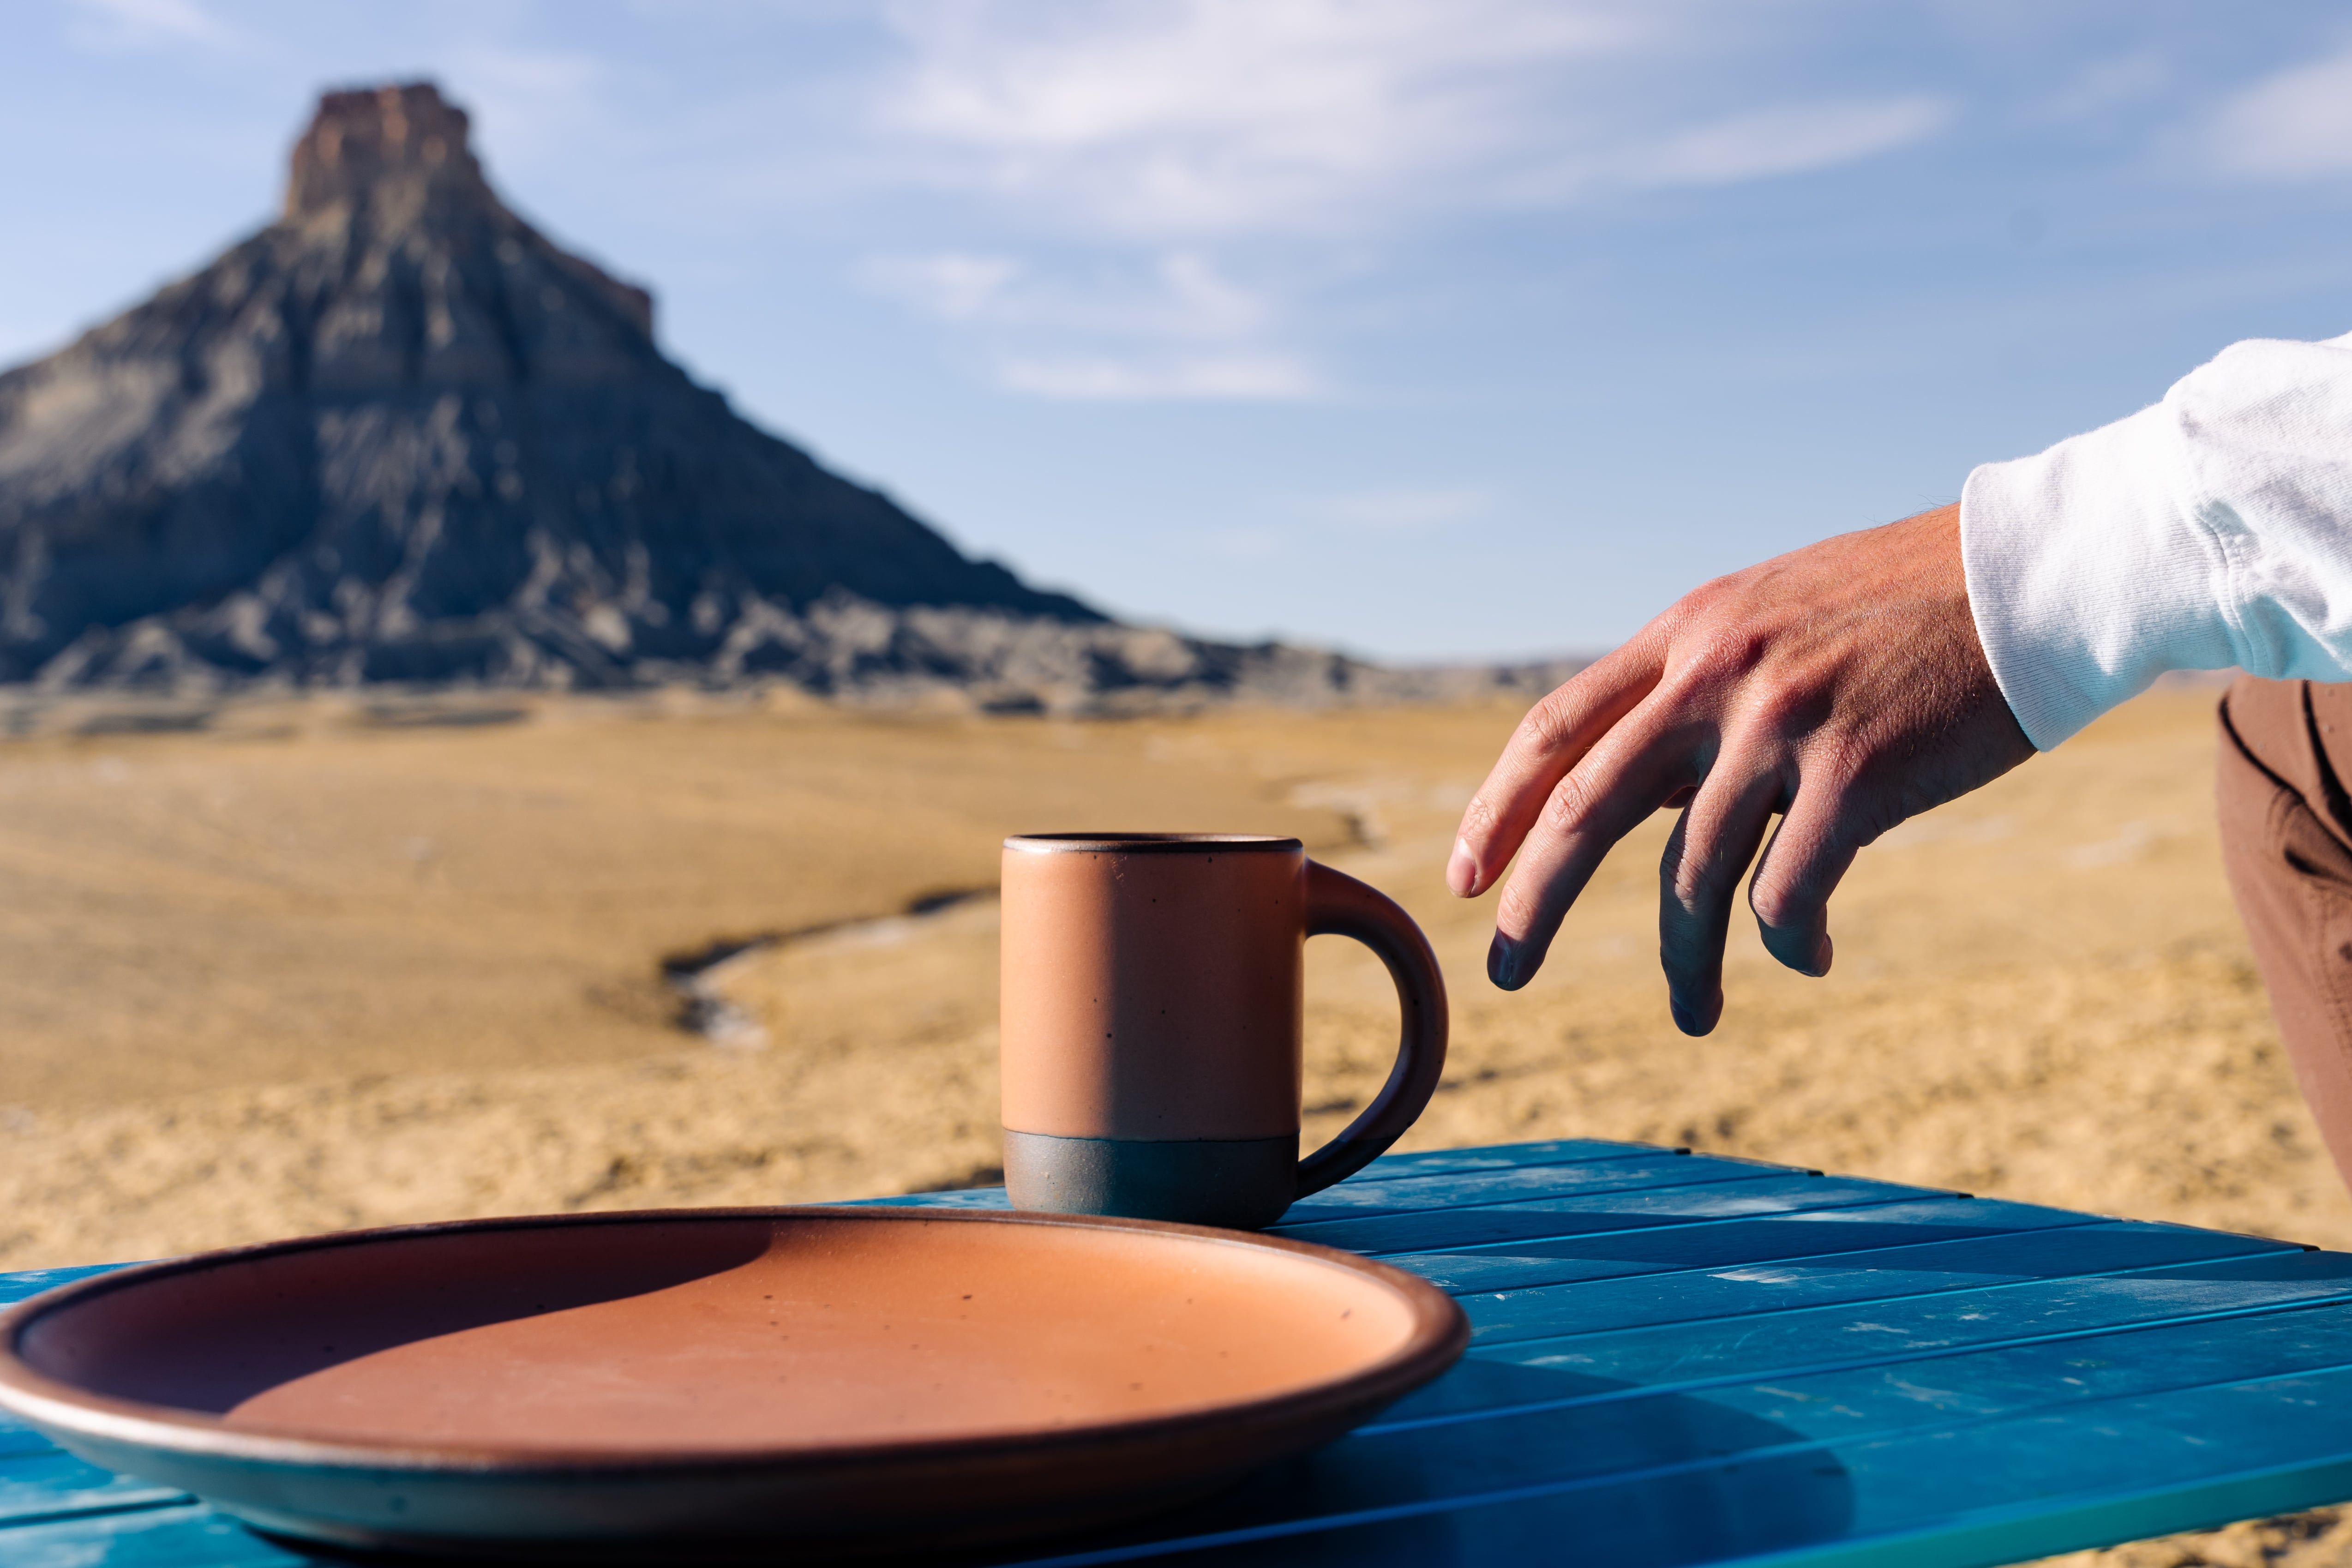 Marcus Catlett photo of hand reaching for Mug and Plate in Utah